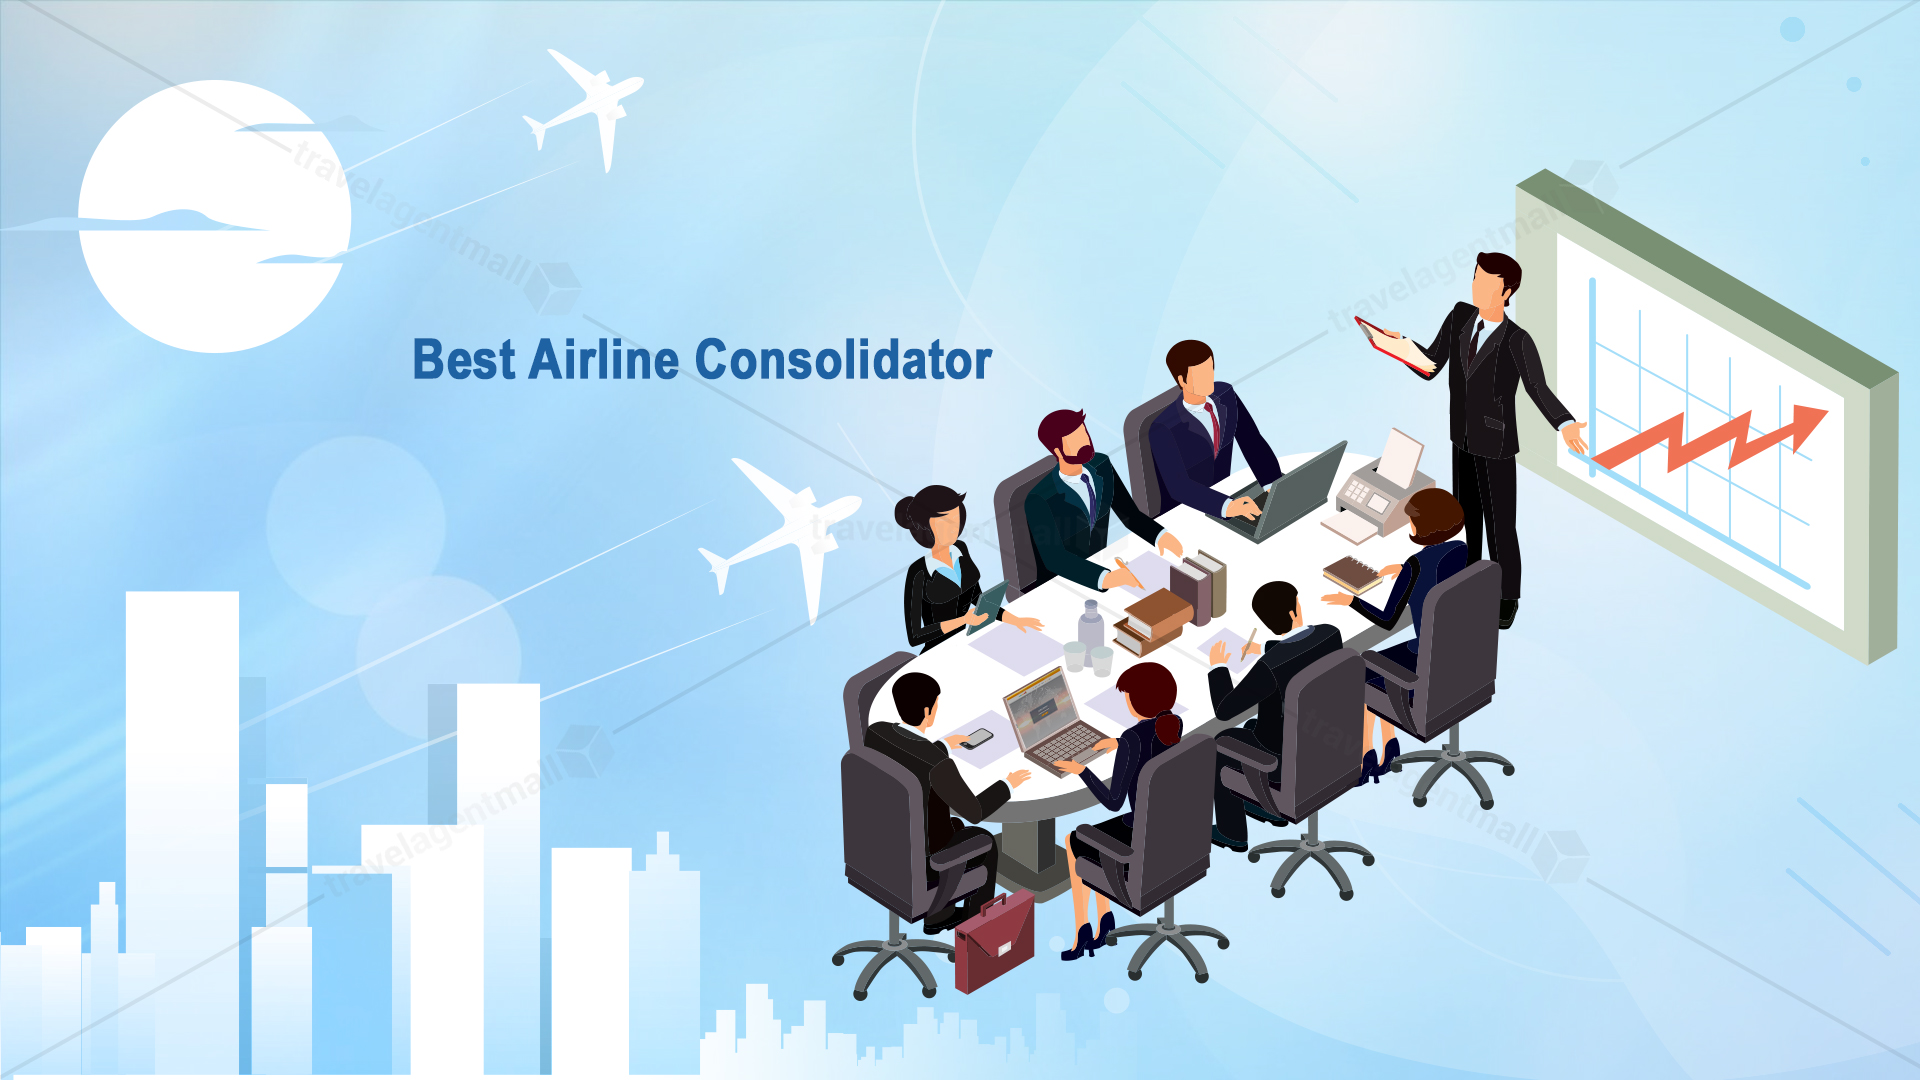 Why do travel agents prefer TravelAgentMall over other airline consolidators?
